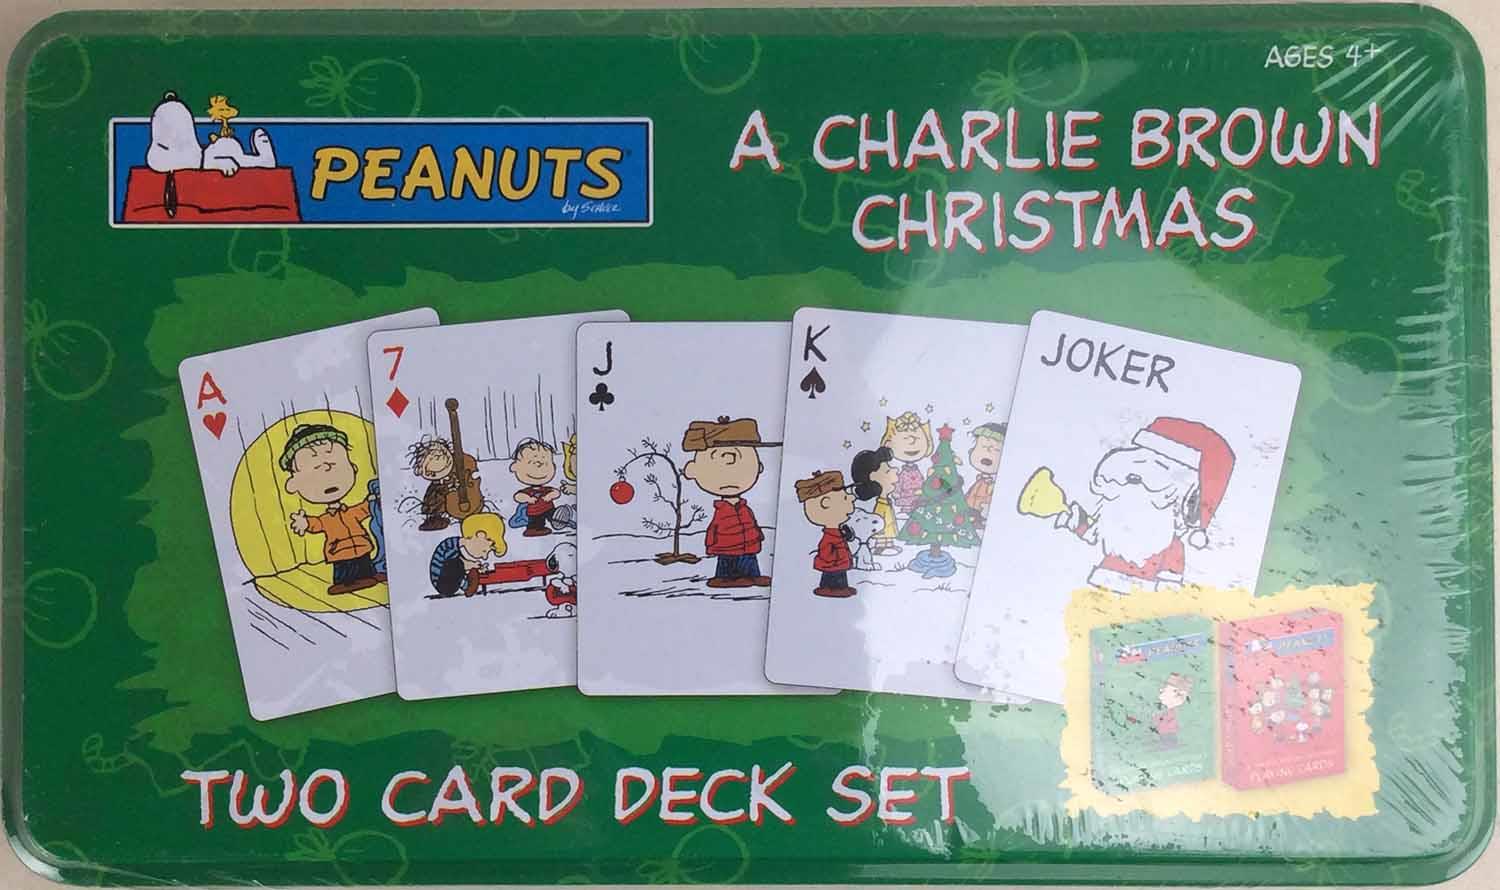 USAOpoly Card Game Peanuts - A Charlie Brown Christmas Playing Card Tin SW | eBay